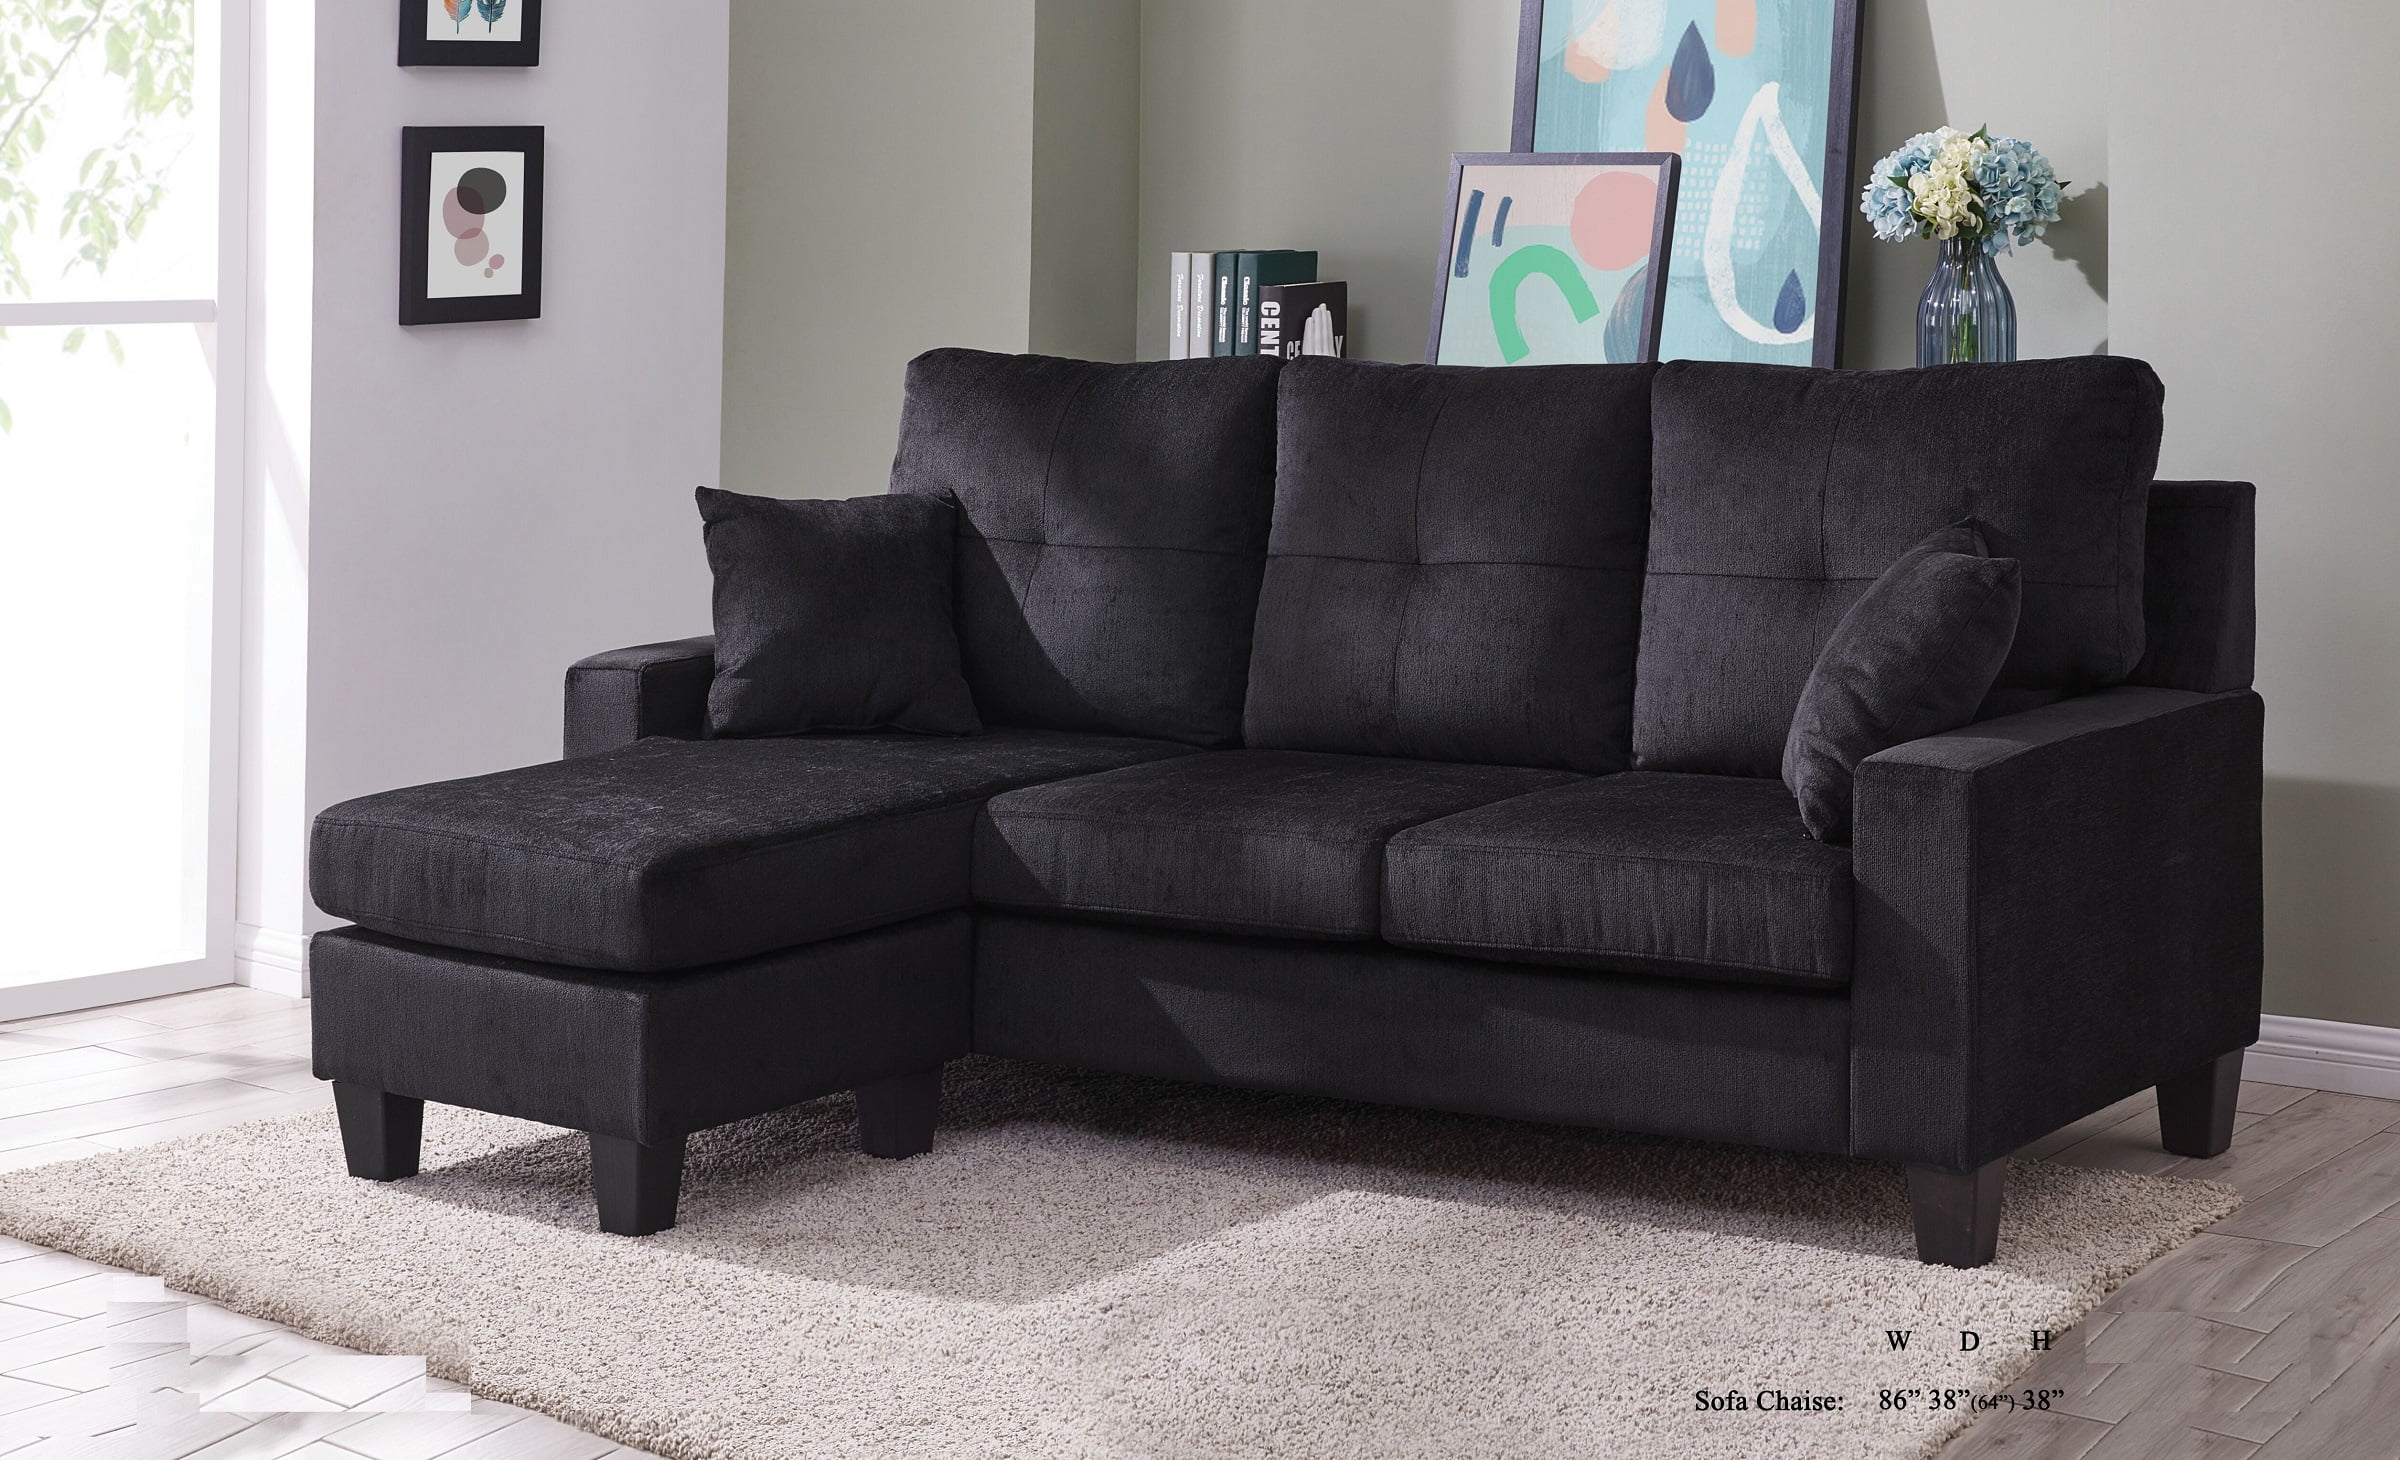 Sectional Sofa Set Black Fabric Tufted Cushion Sofa Chaise Small Space Living Room Furniture